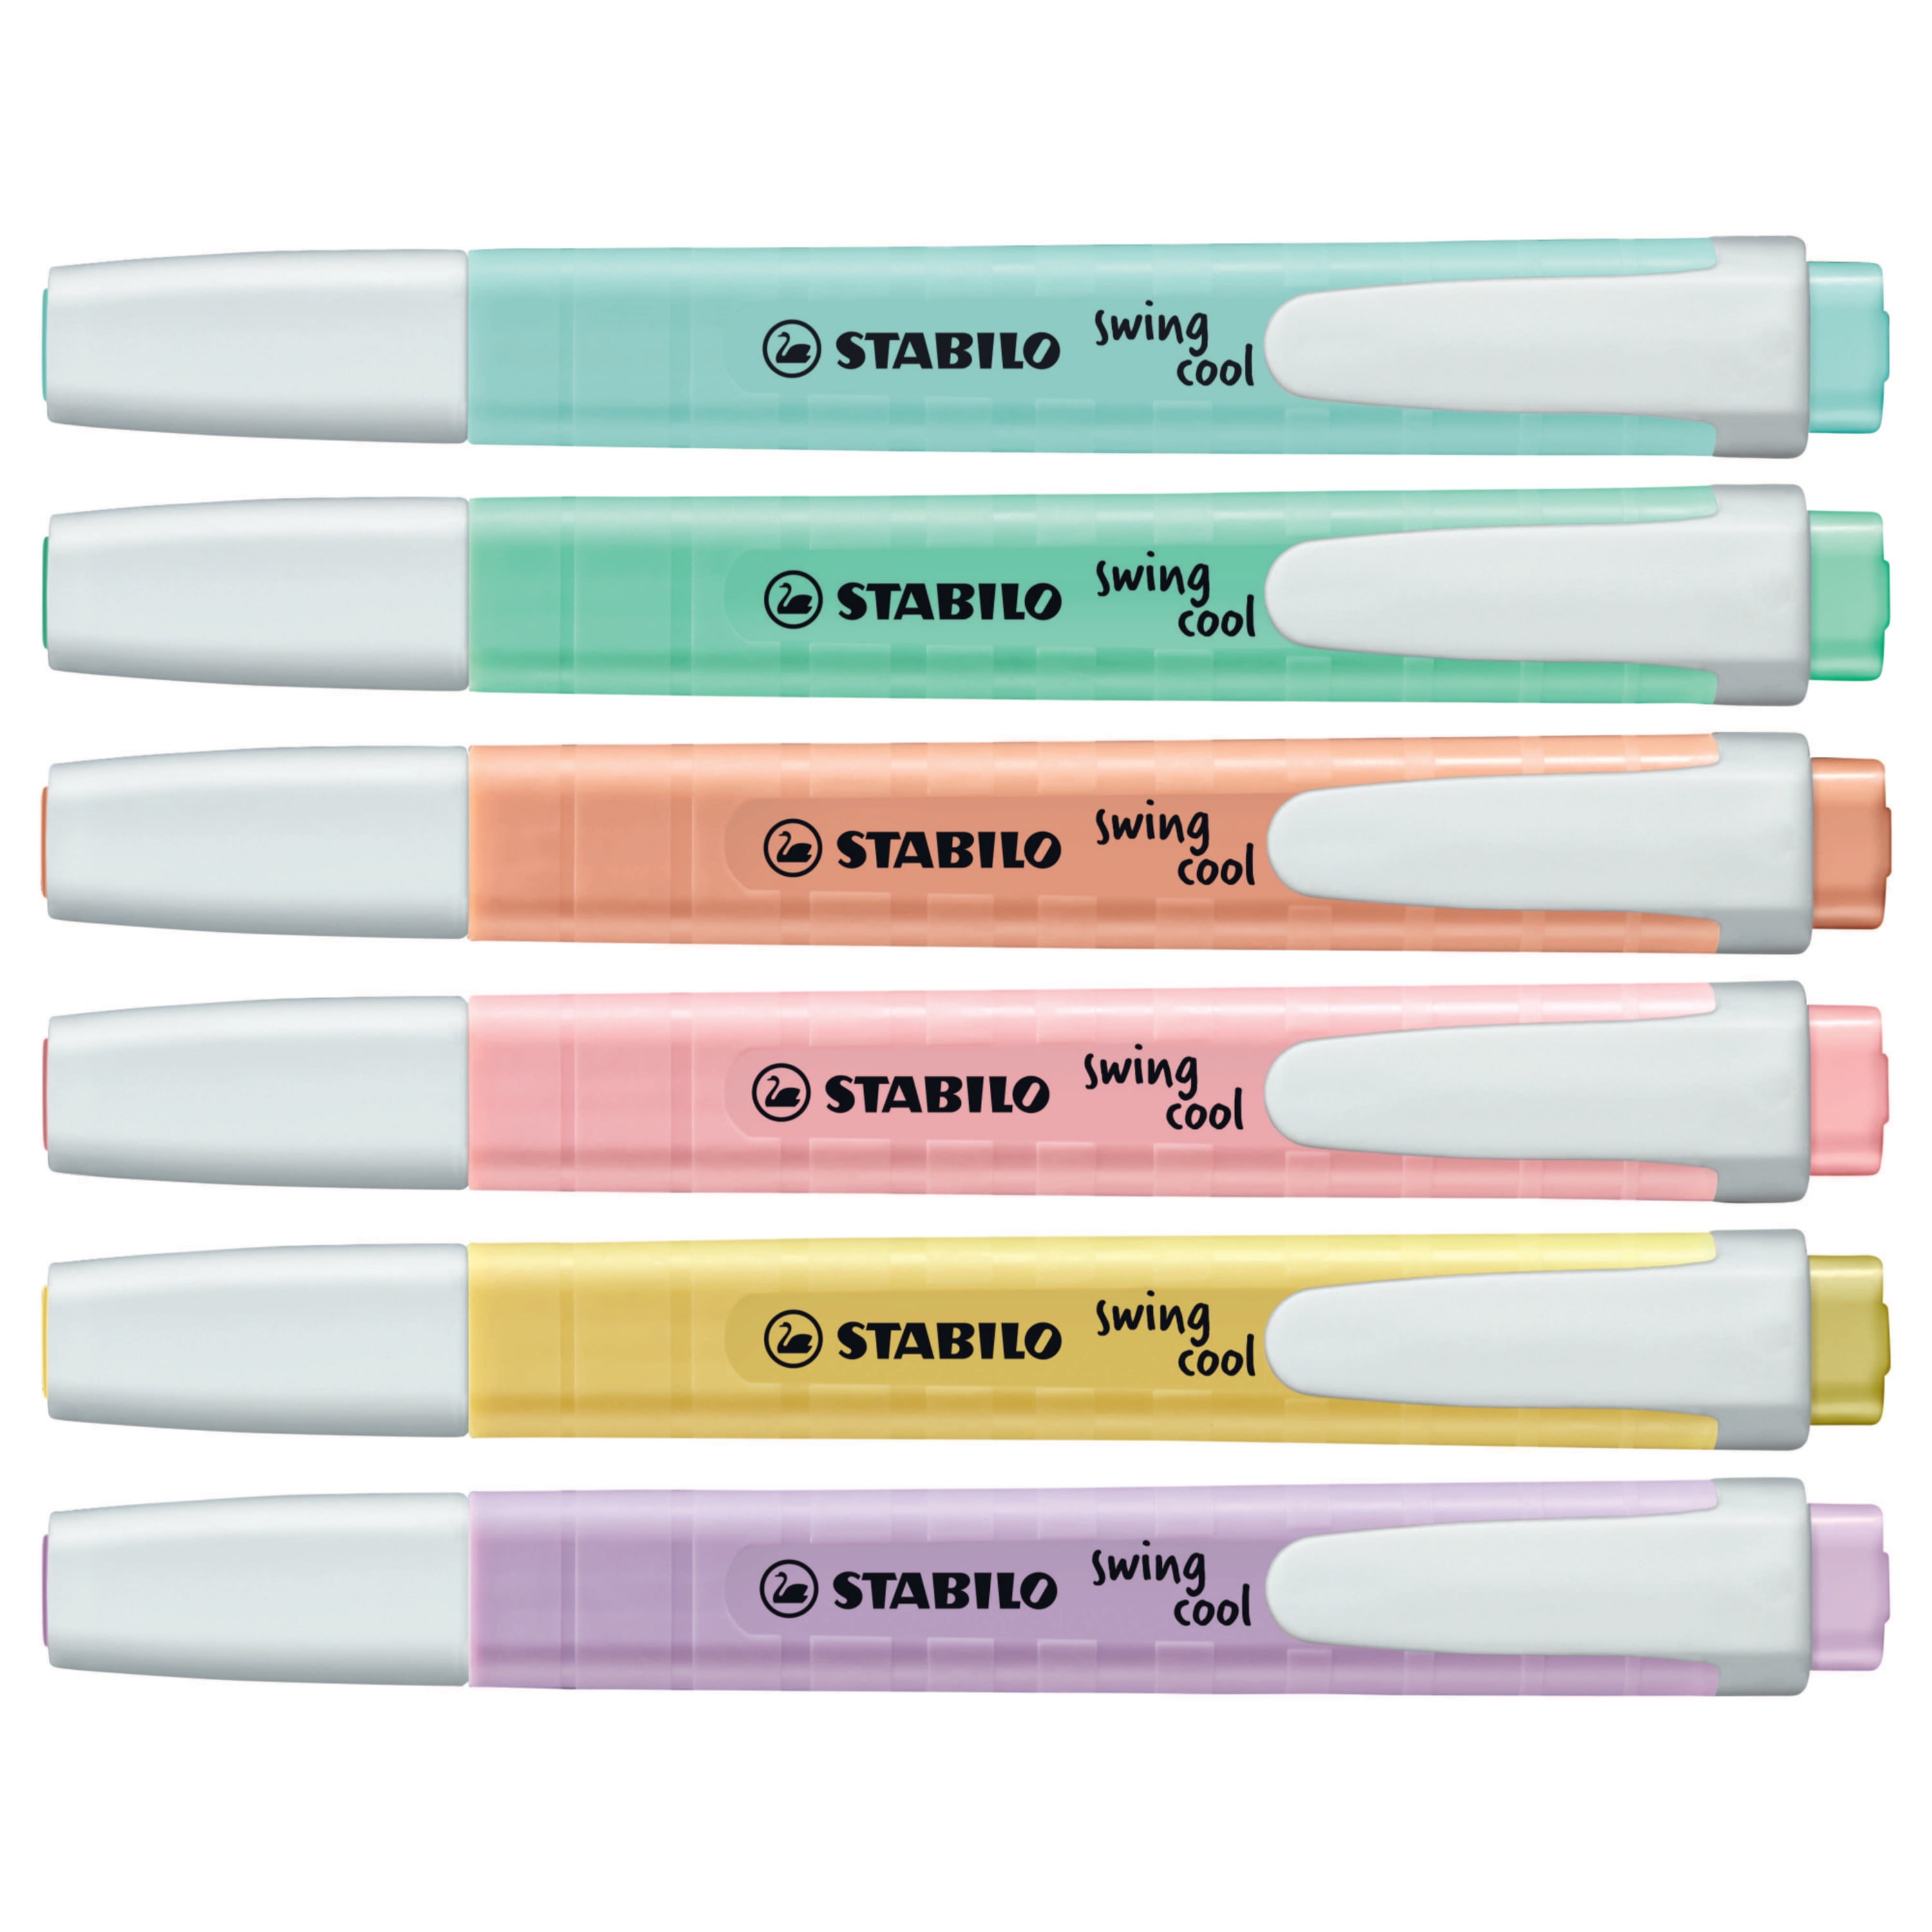  STABILO Highlighter swing cool Pastel - Wallet of 4 - Assorted  colors : Everything Else